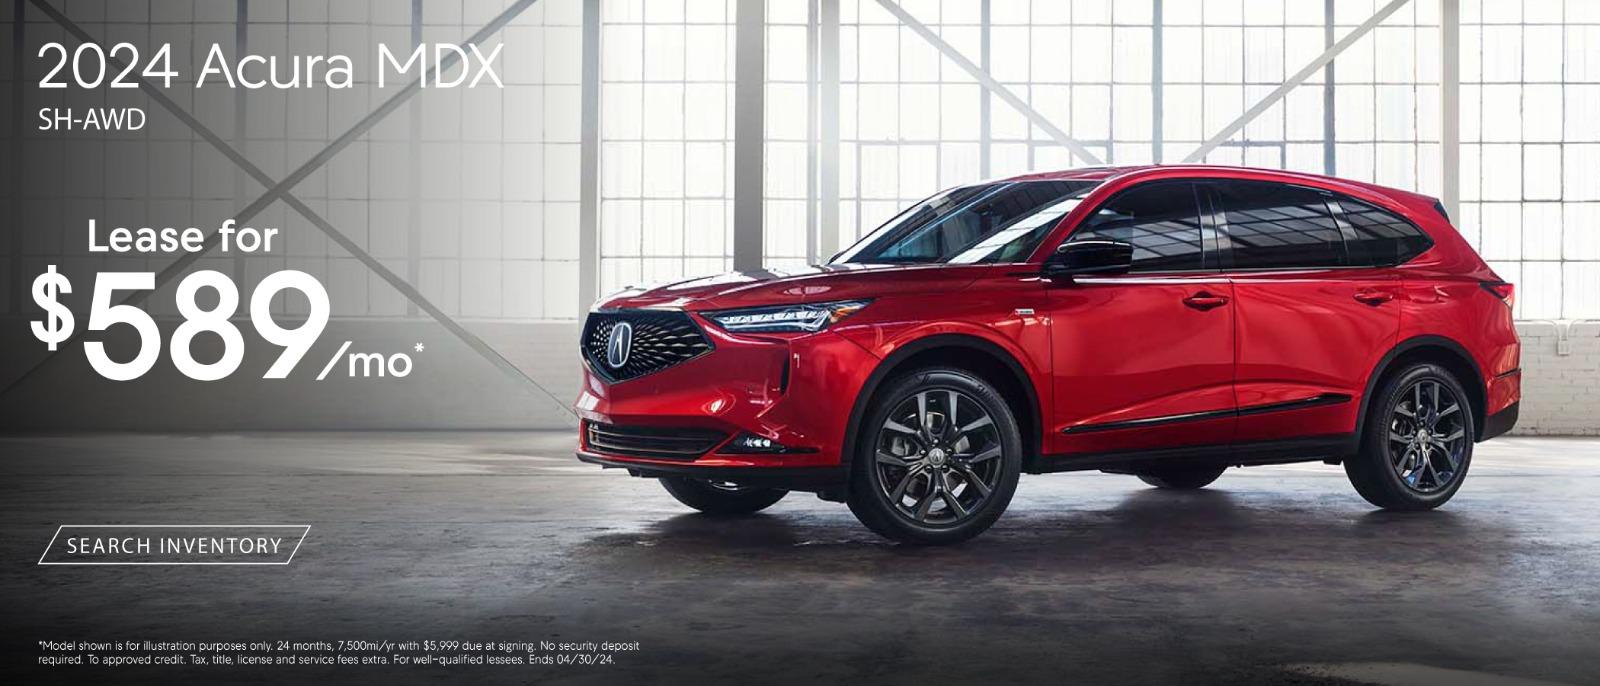 2024 Acura MDX Lease for $589 per month